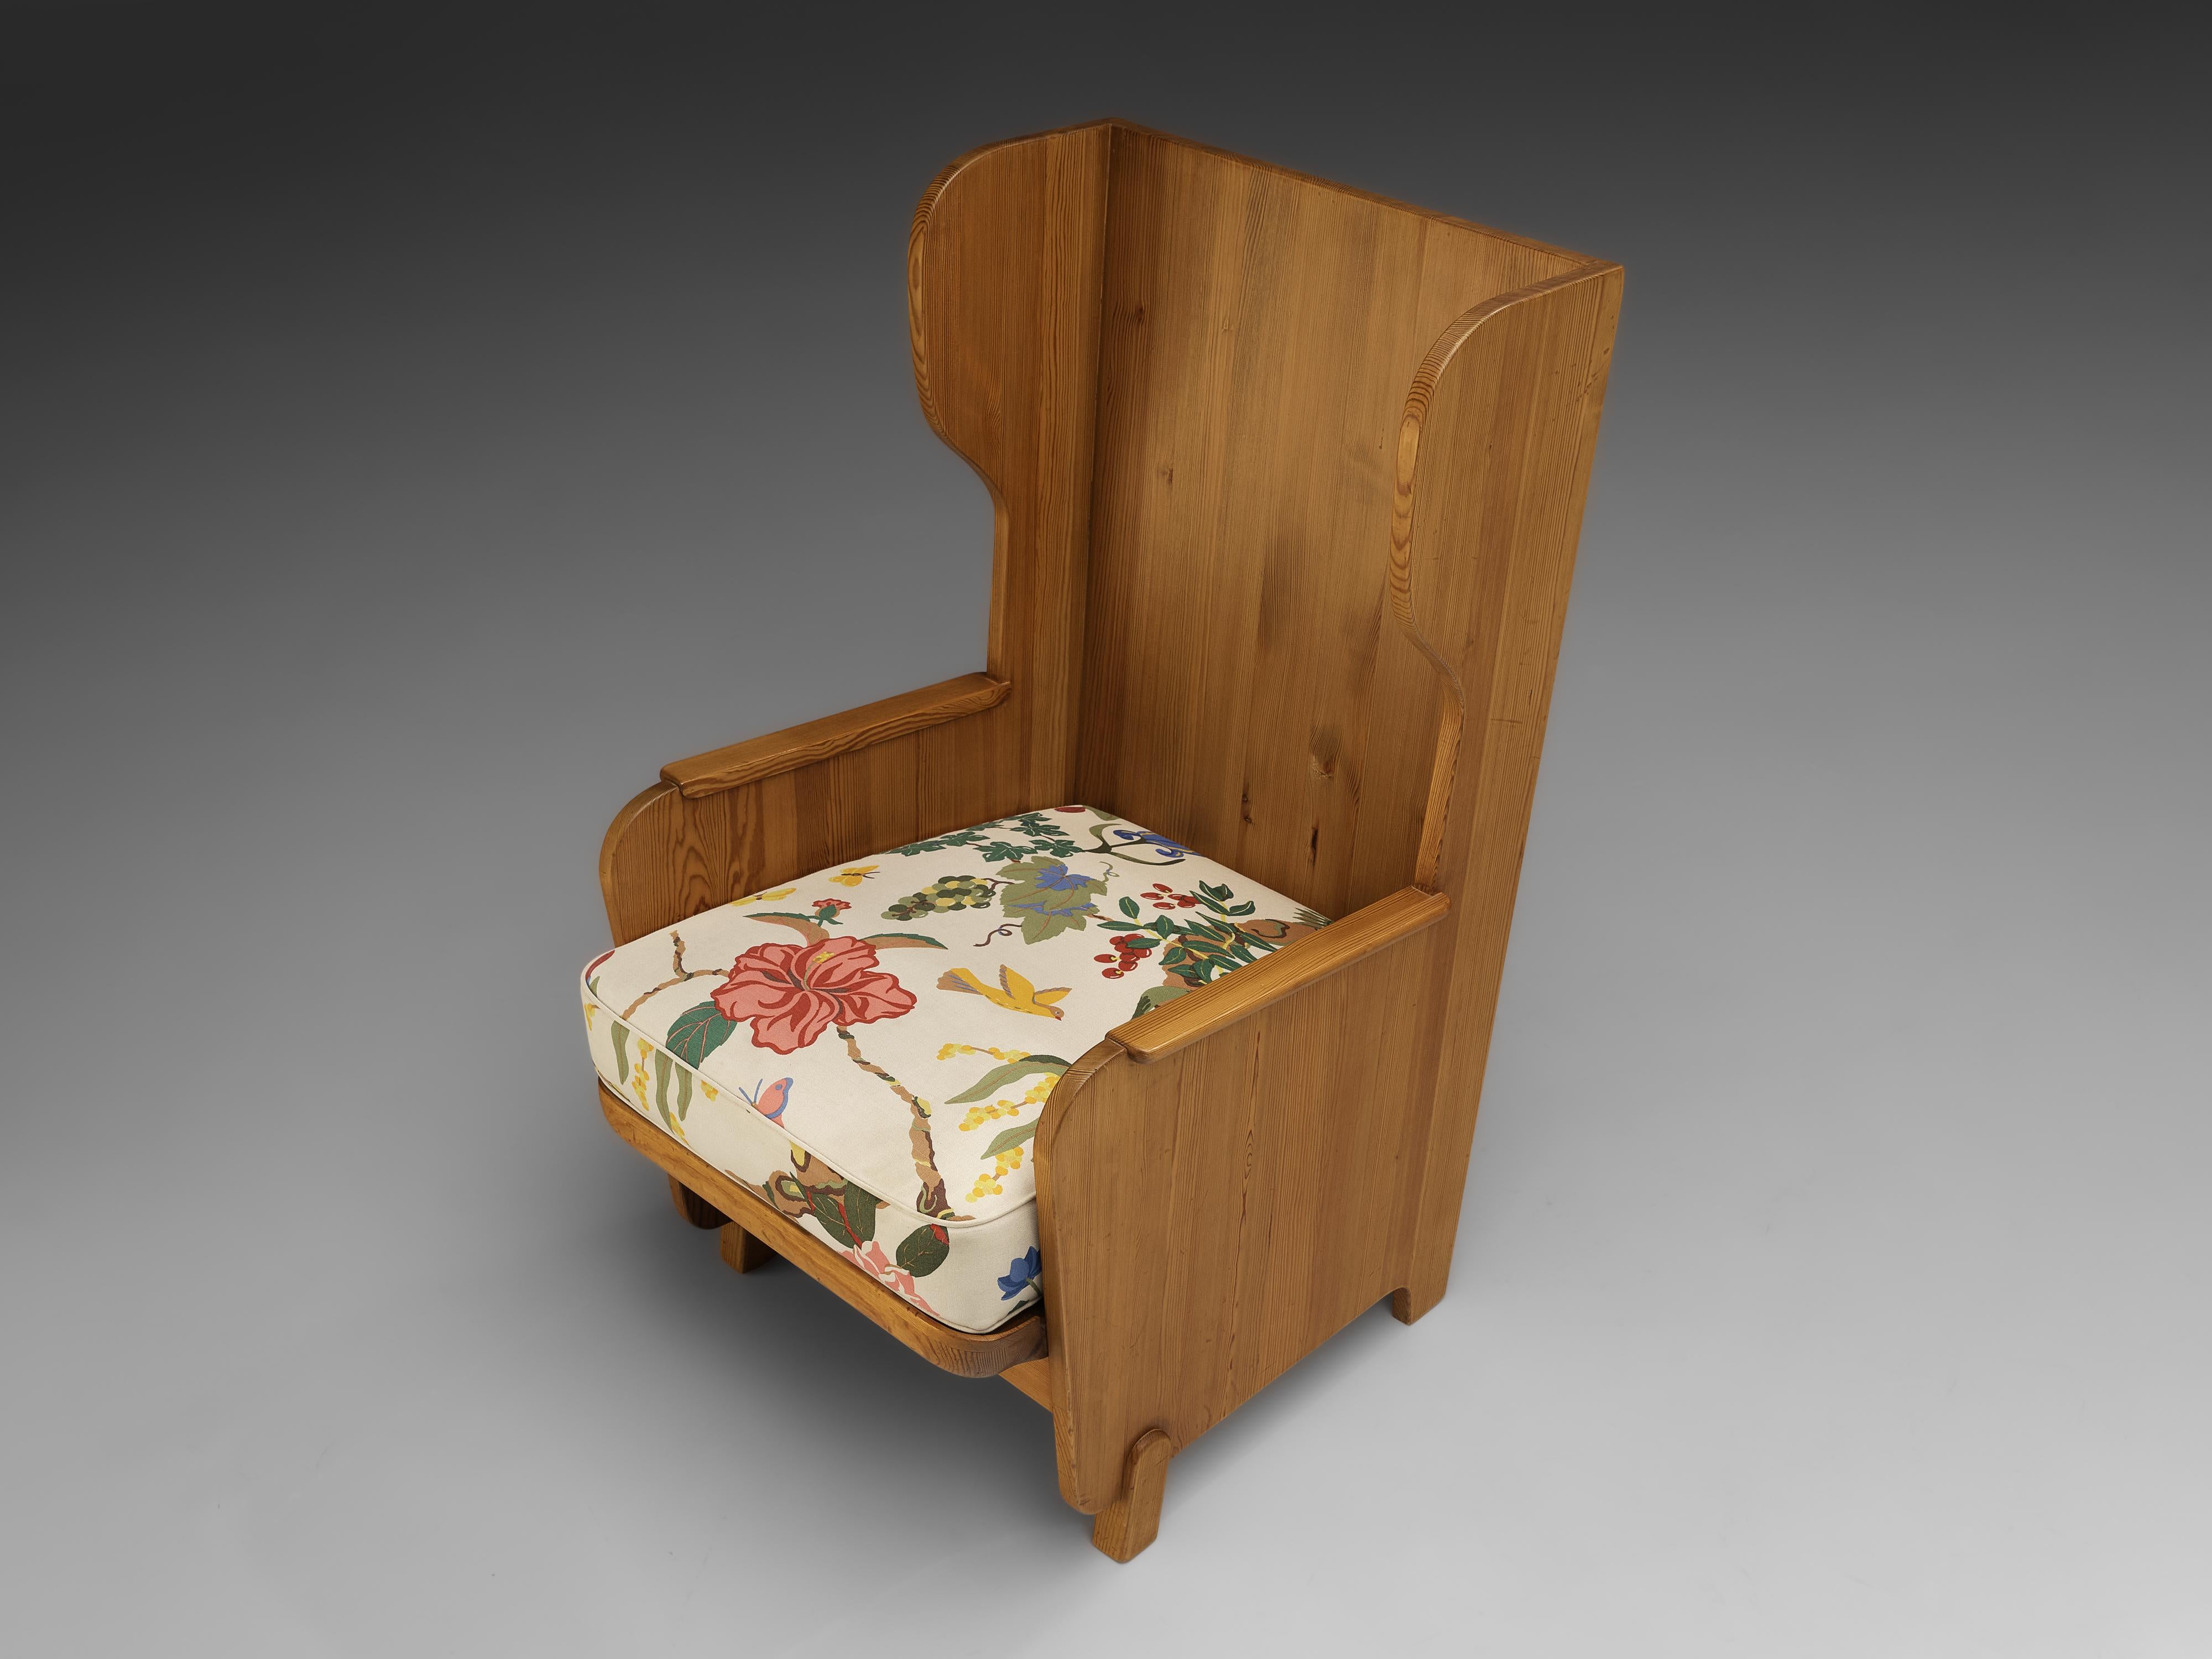 Axel Einar Hjorth, wingback lounge chair model 'Lovö', pine, floral fabric, Sweden, 1932

Sturdy high back ‘Lovö’ chair in solid pine by Axel Einar Hjorth. This chair has all classical elements of a wingback chair, yet due the execution in natural